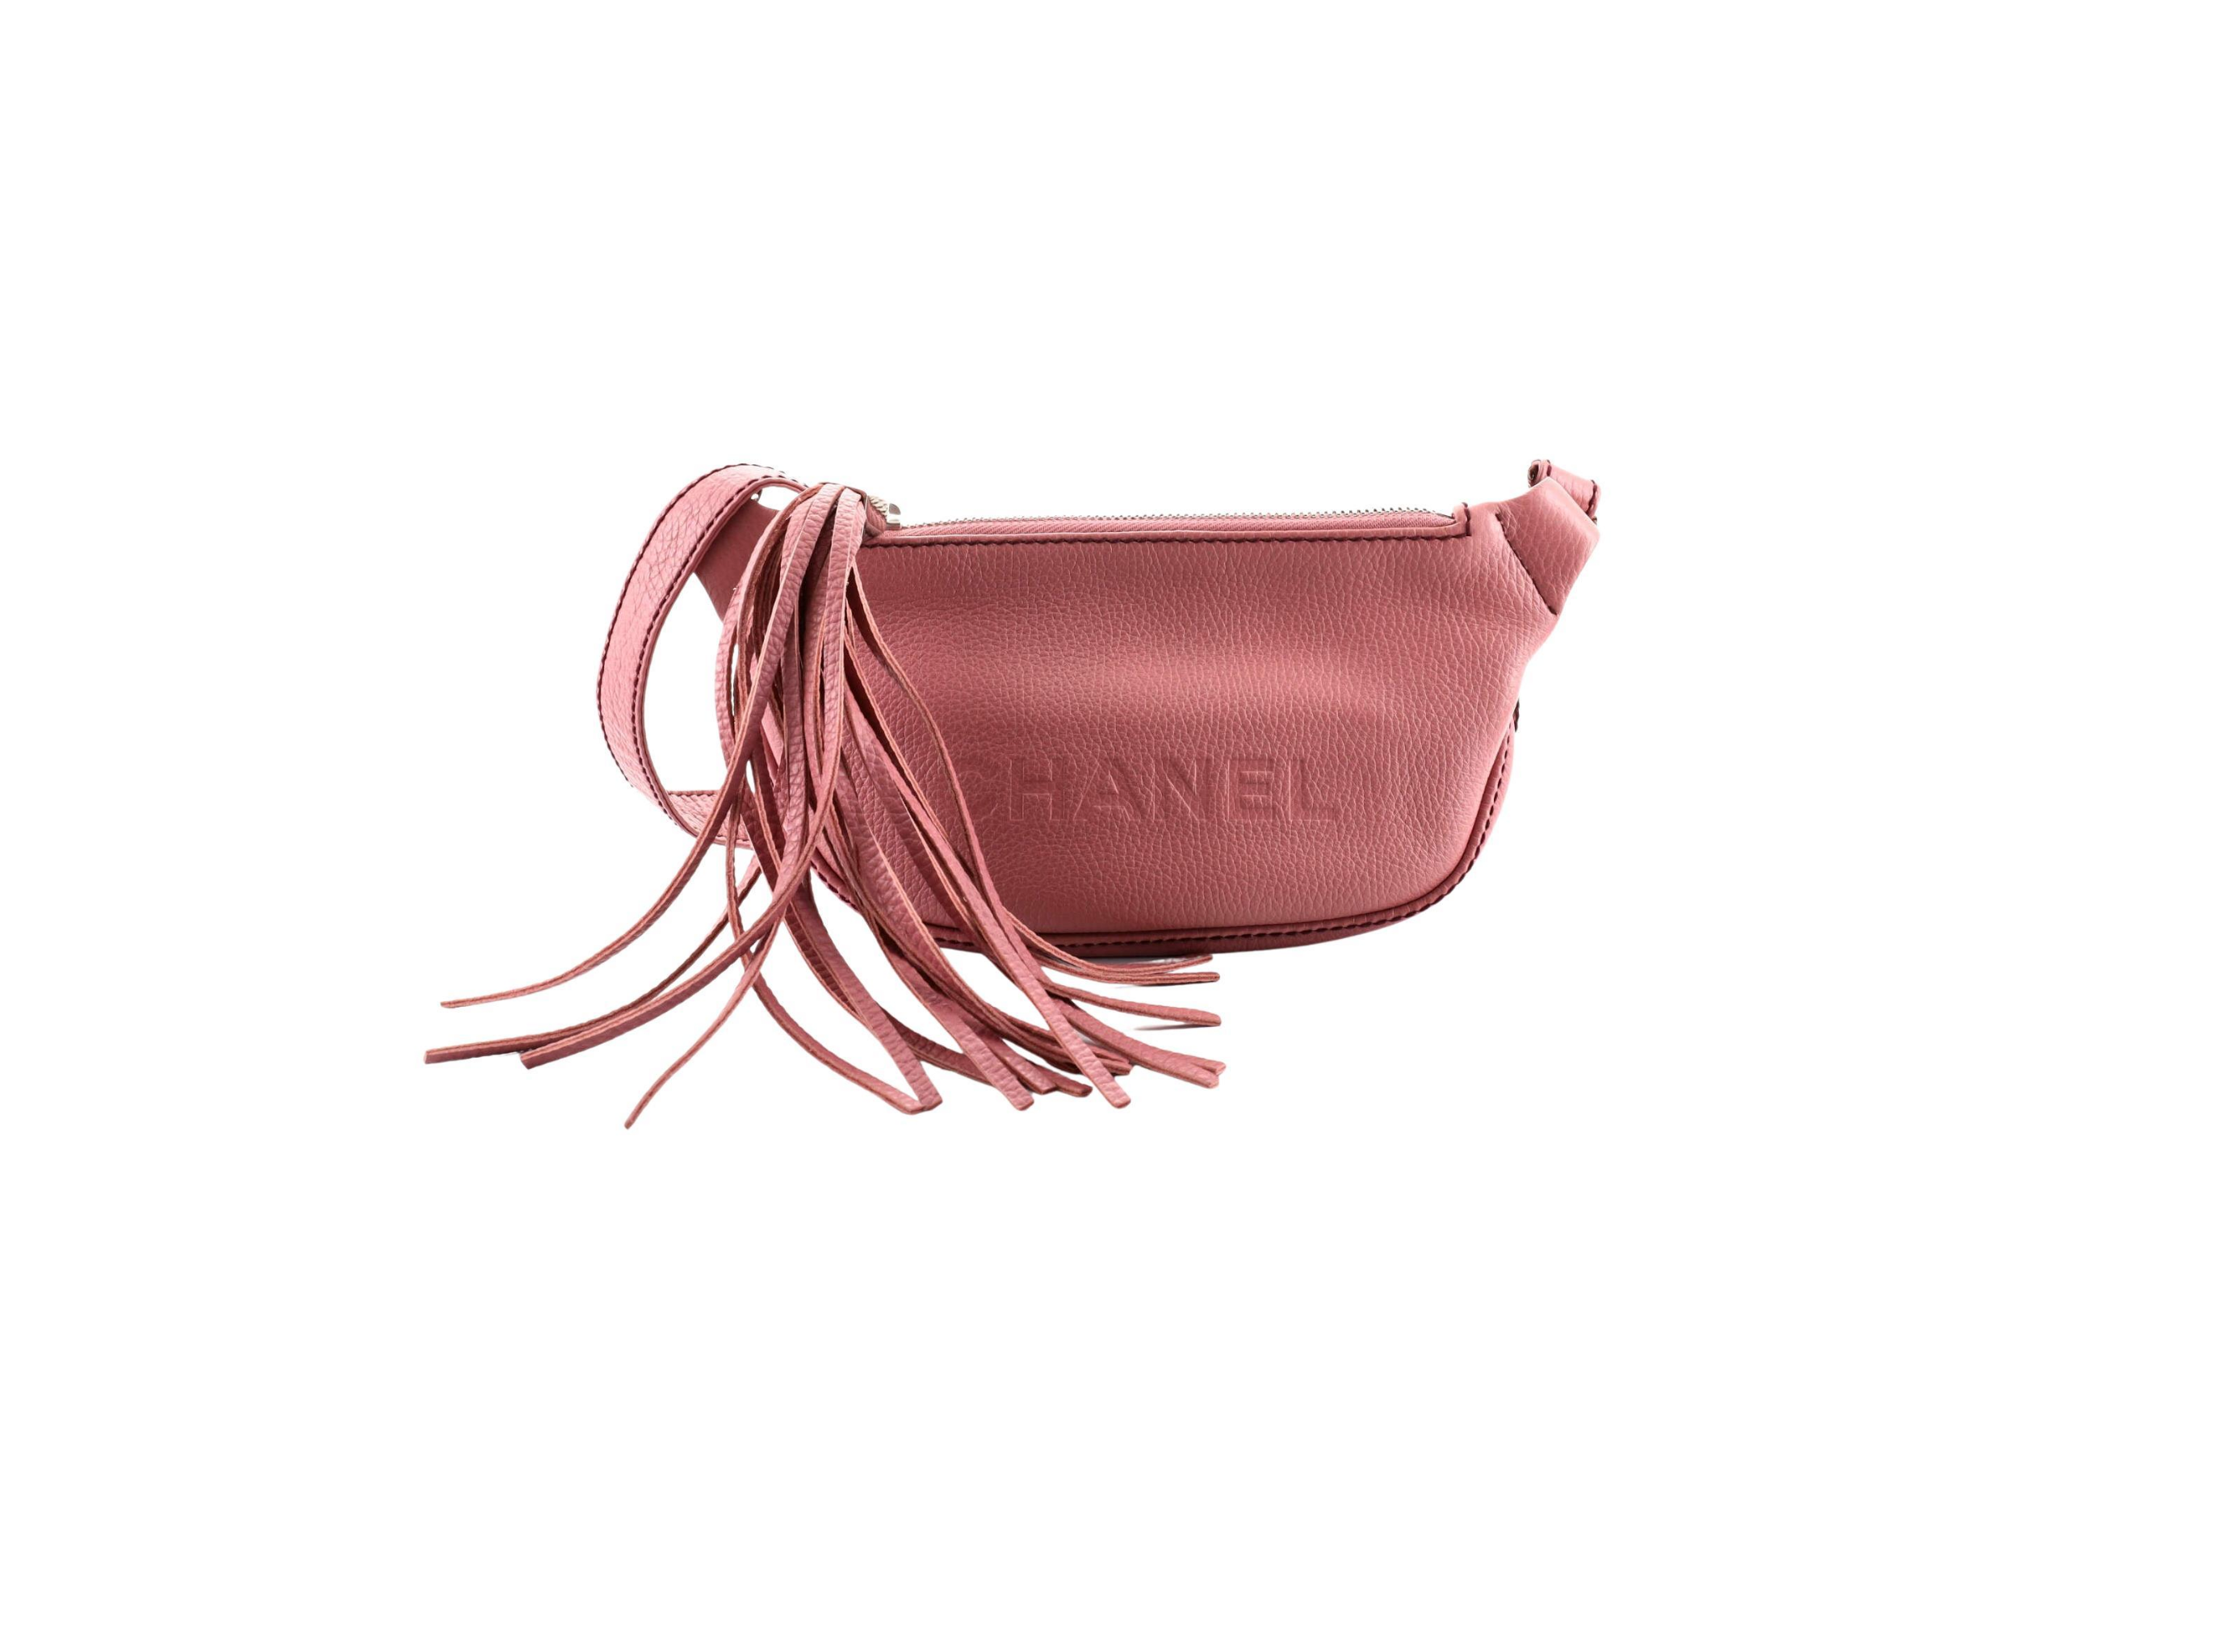 Chanel Lax Crossbody Bag Pebbled Leather Pink